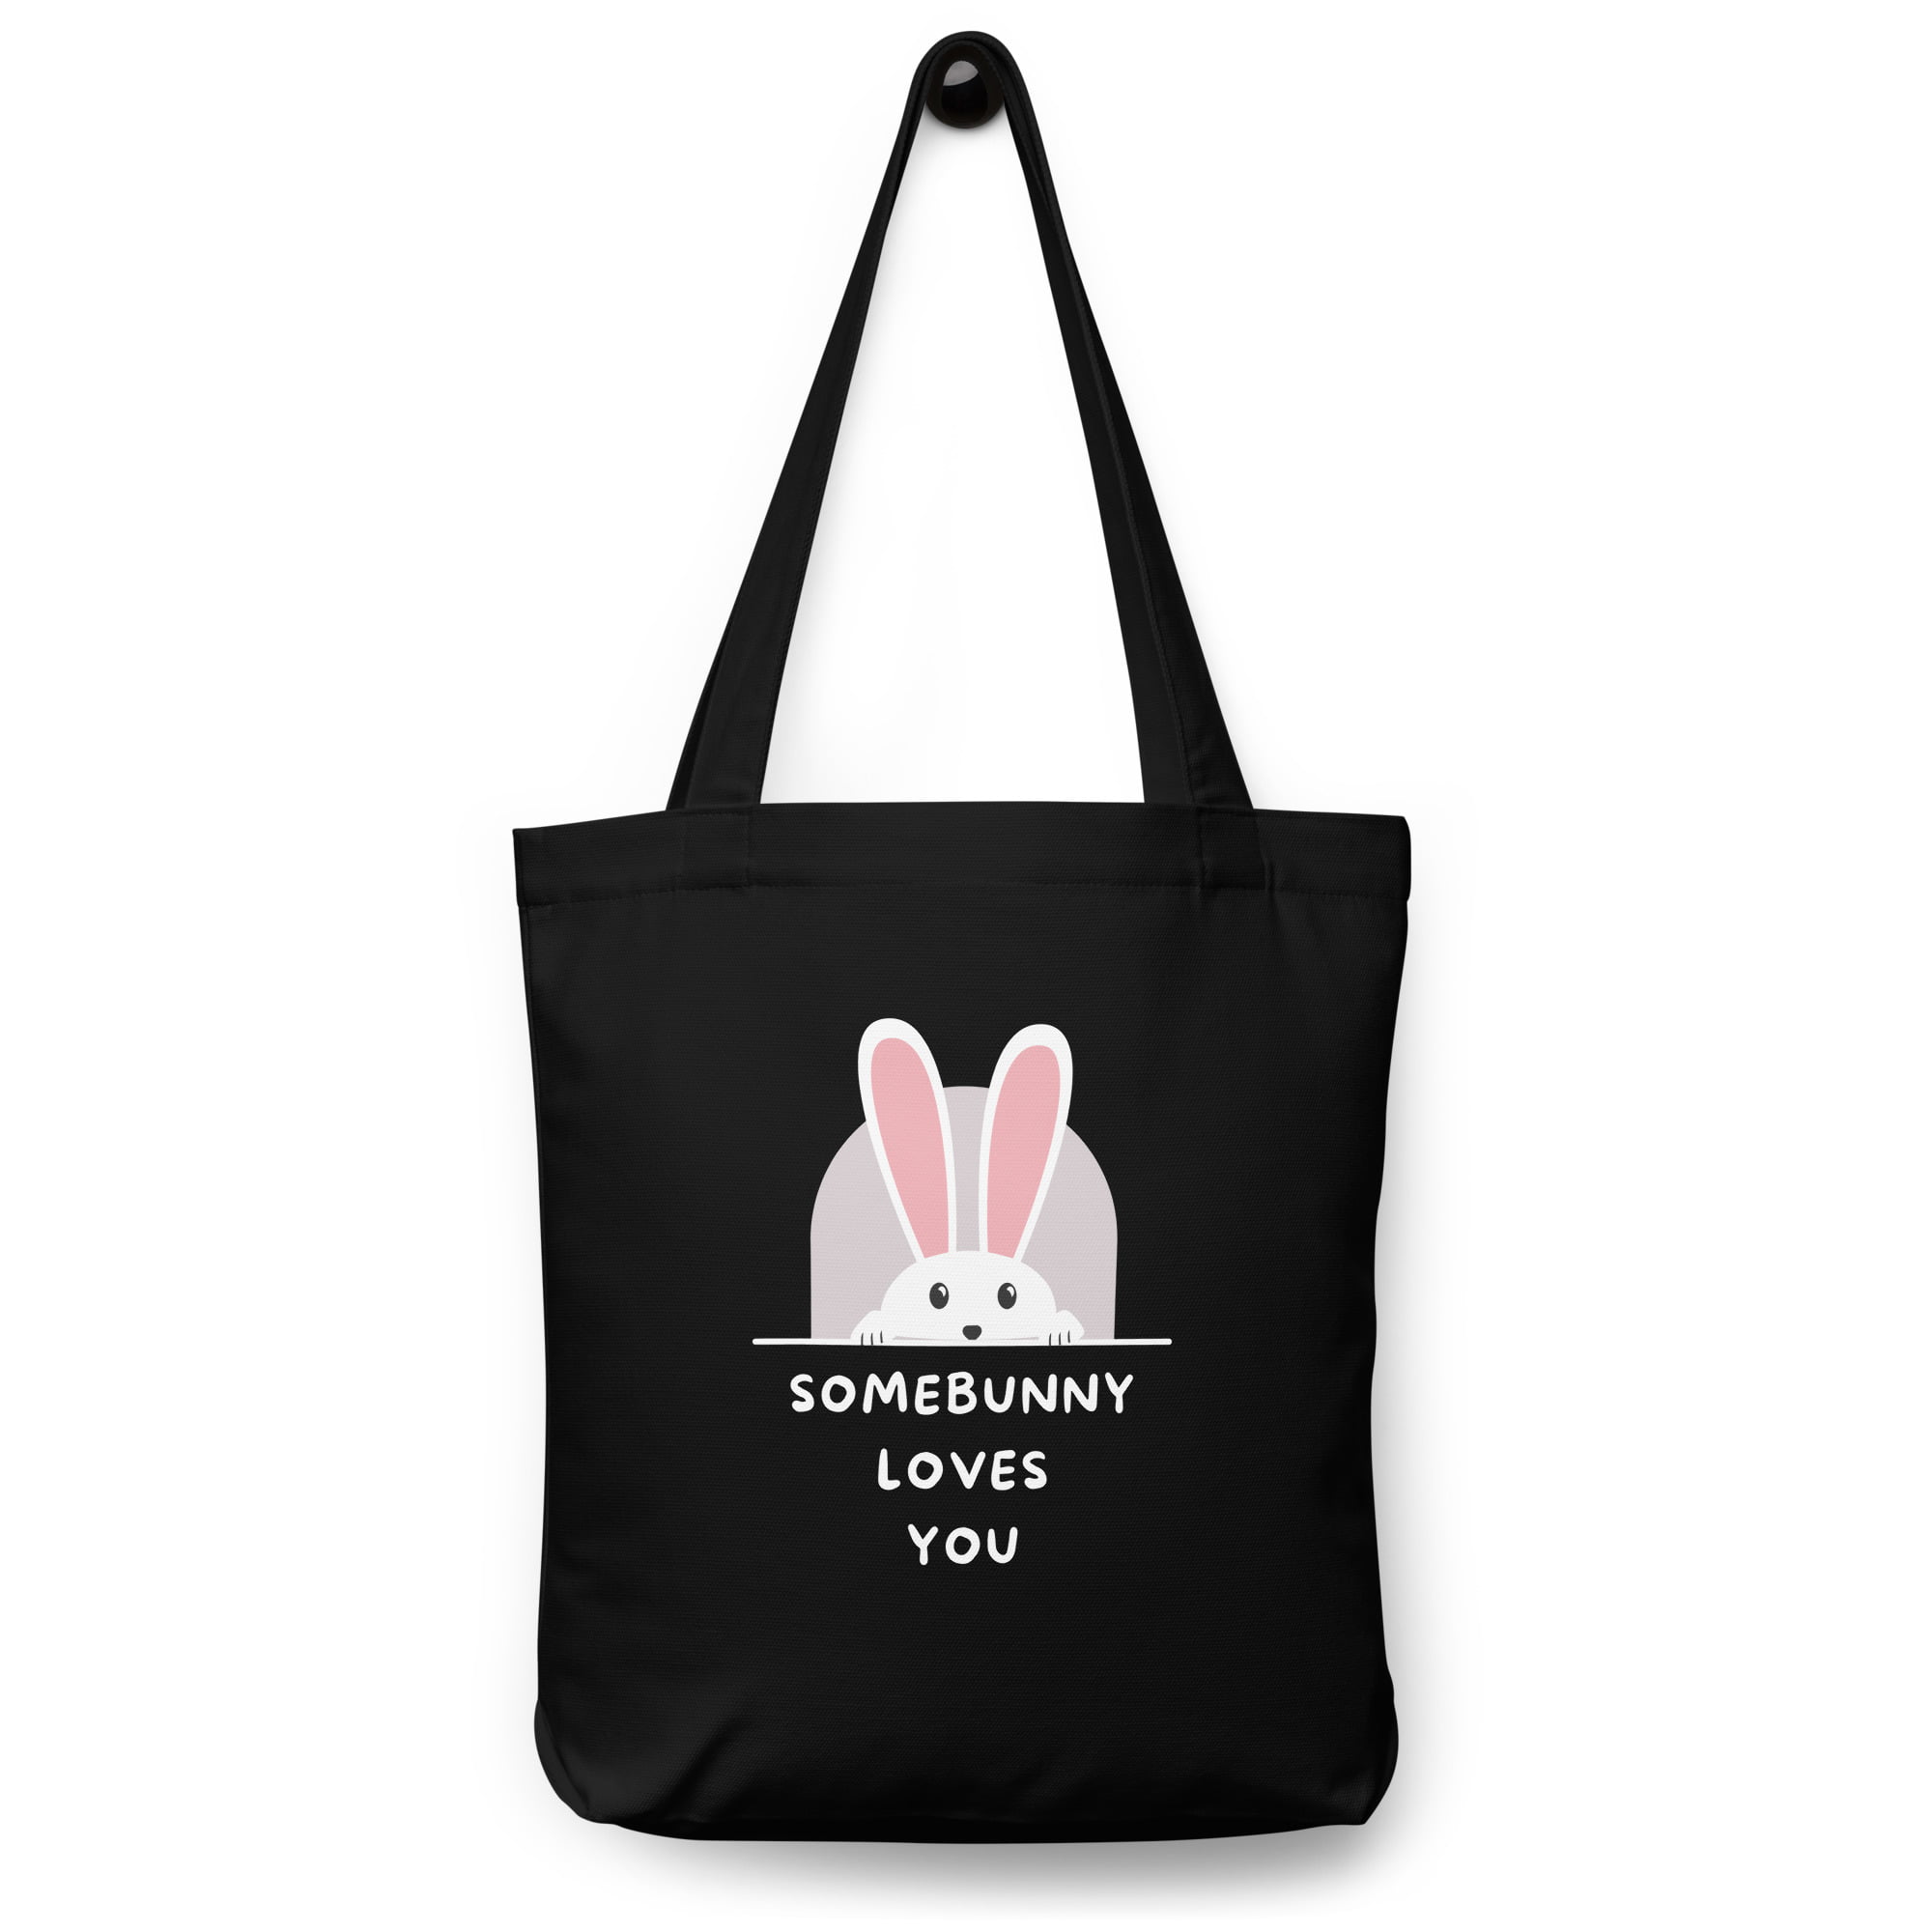 Somebunny Loves You Cotton Tote Bag – Bree And Co